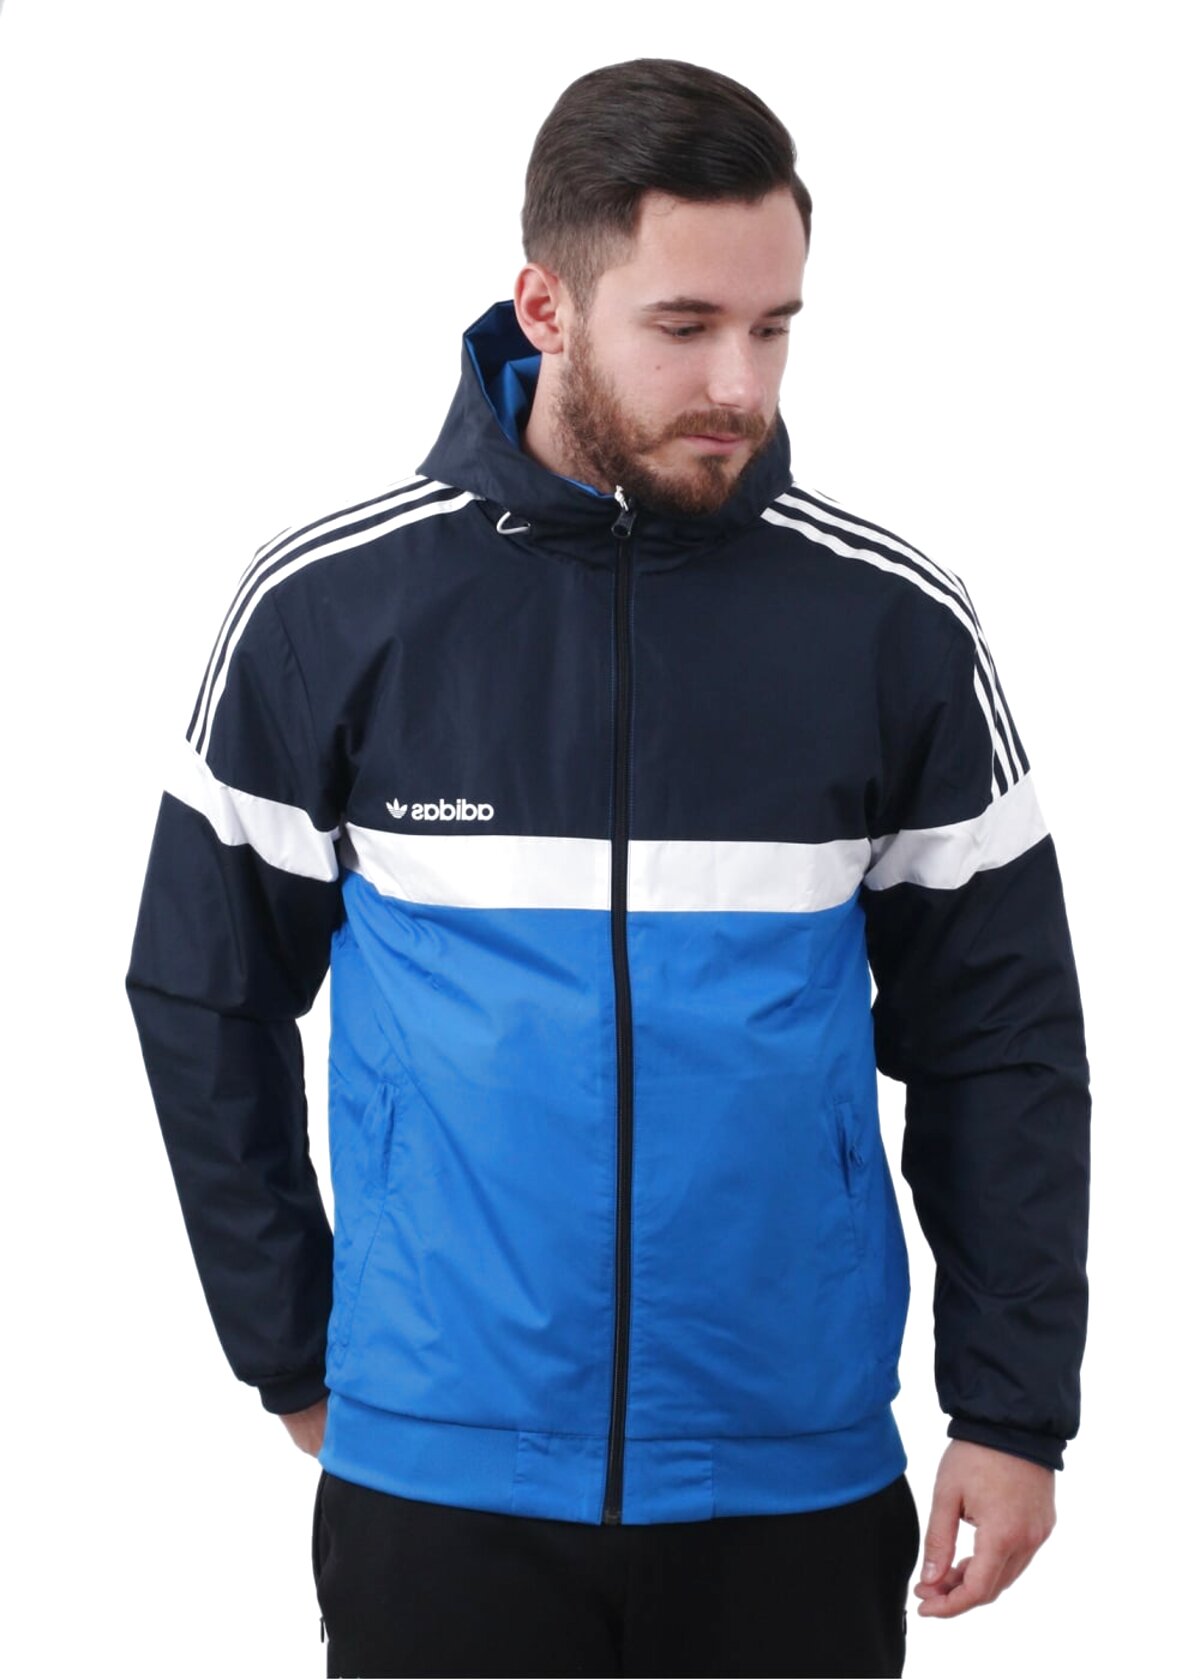 Adidas Jacket for sale in UK | 64 ads